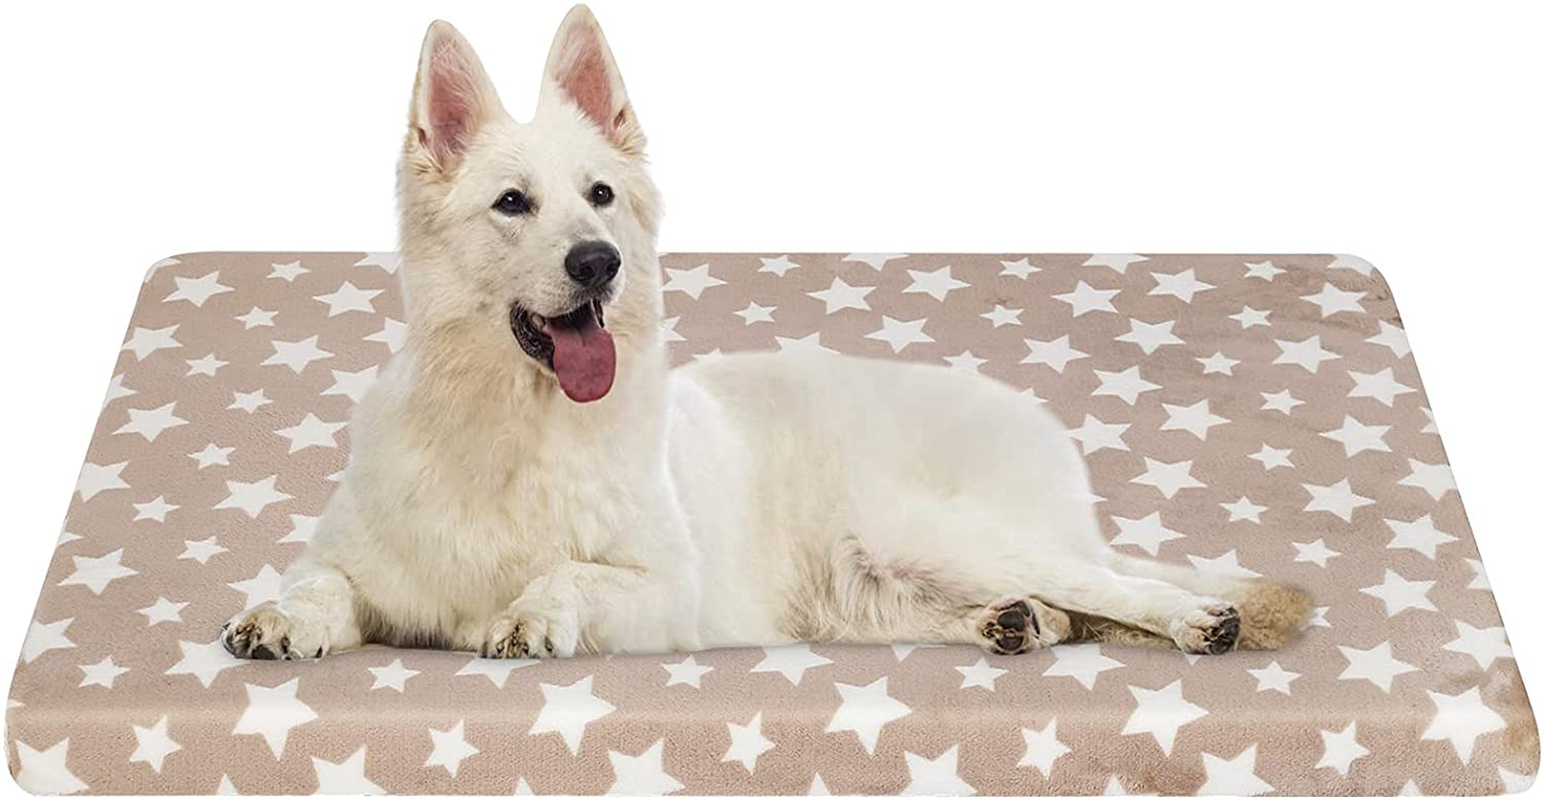 EMPSIGN Waterproof Dog Bed Crate Pad, Dog Bed Mat Reversible (Warm & Cool), Removable Washable Cover, Waterproof Liner & High Density Foam, Pet Bed Mattress for Small to Xx-Large Dogs, Beige, Star